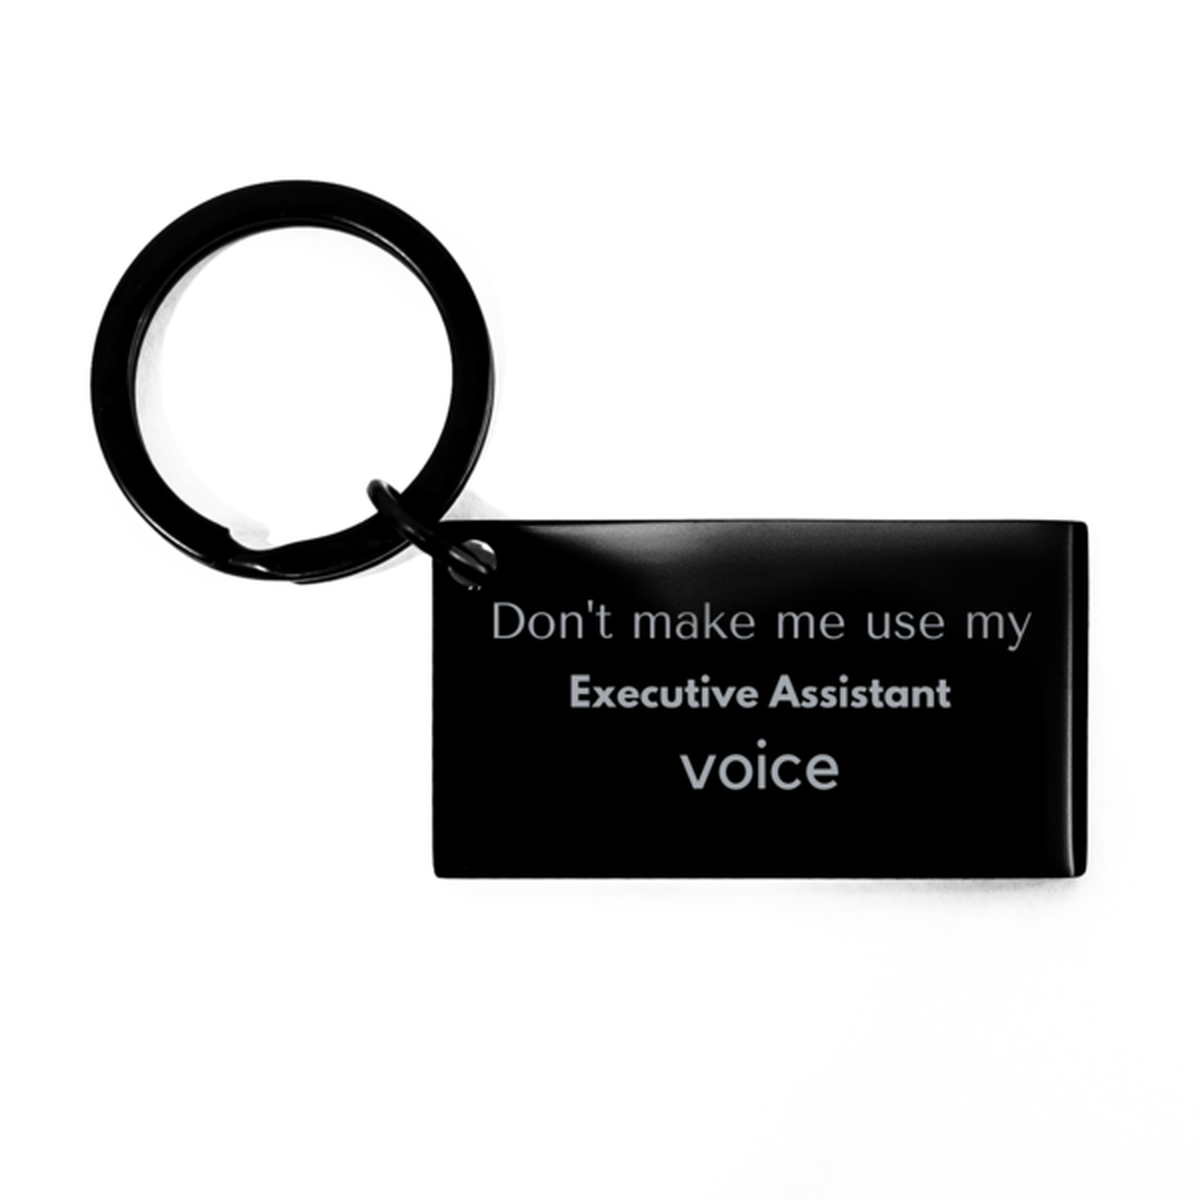 Don't make me use my Executive Assistant voice, Sarcasm Executive Assistant Gifts, Christmas Executive Assistant Keychain Birthday Unique Gifts For Executive Assistant Coworkers, Men, Women, Colleague, Friends